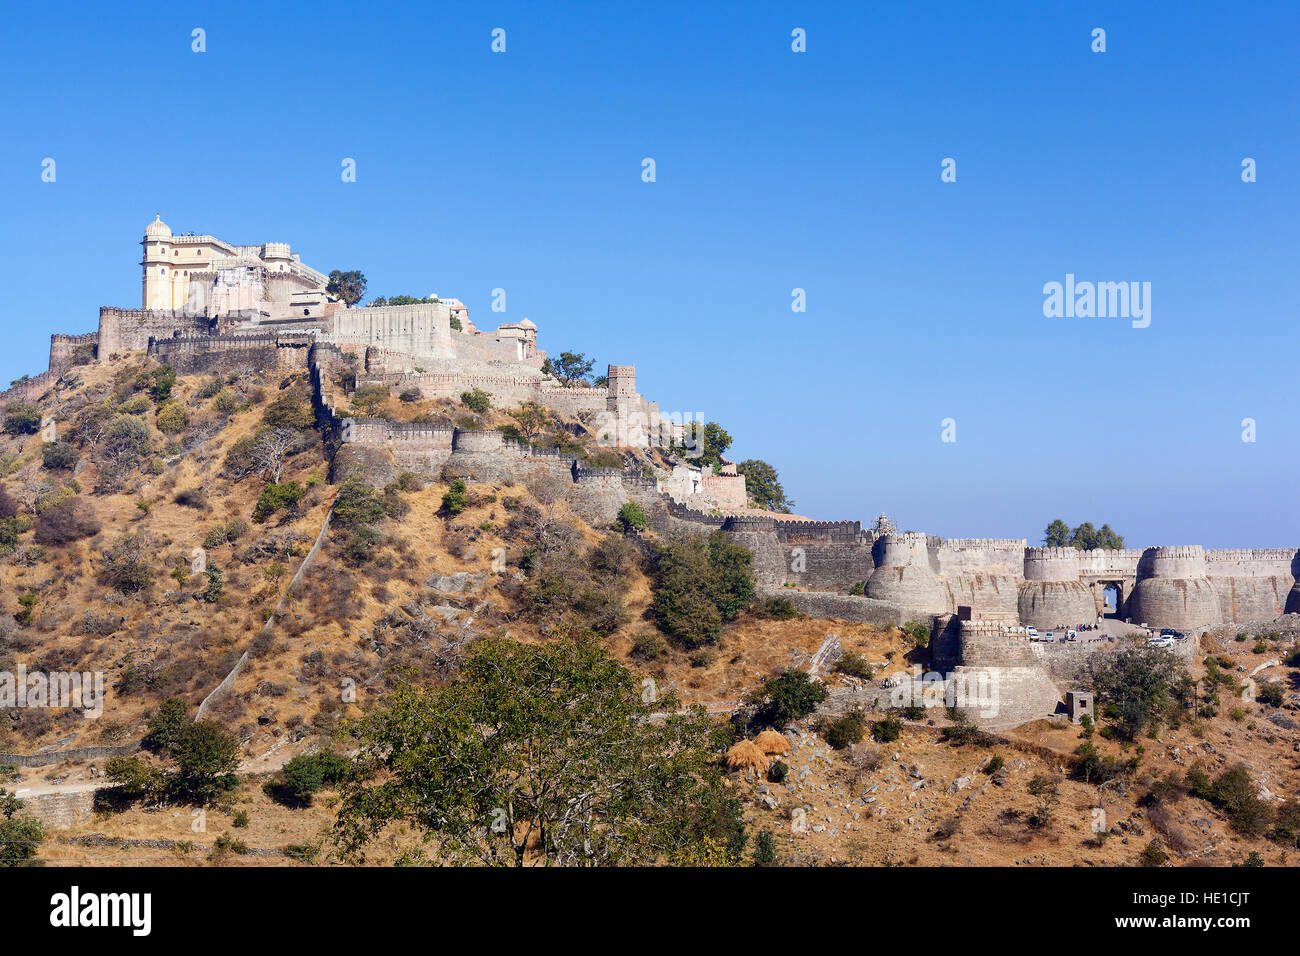 Kumbhalgarh Fort in Rajasthan, India on a clear, sunny day. Stock Photo